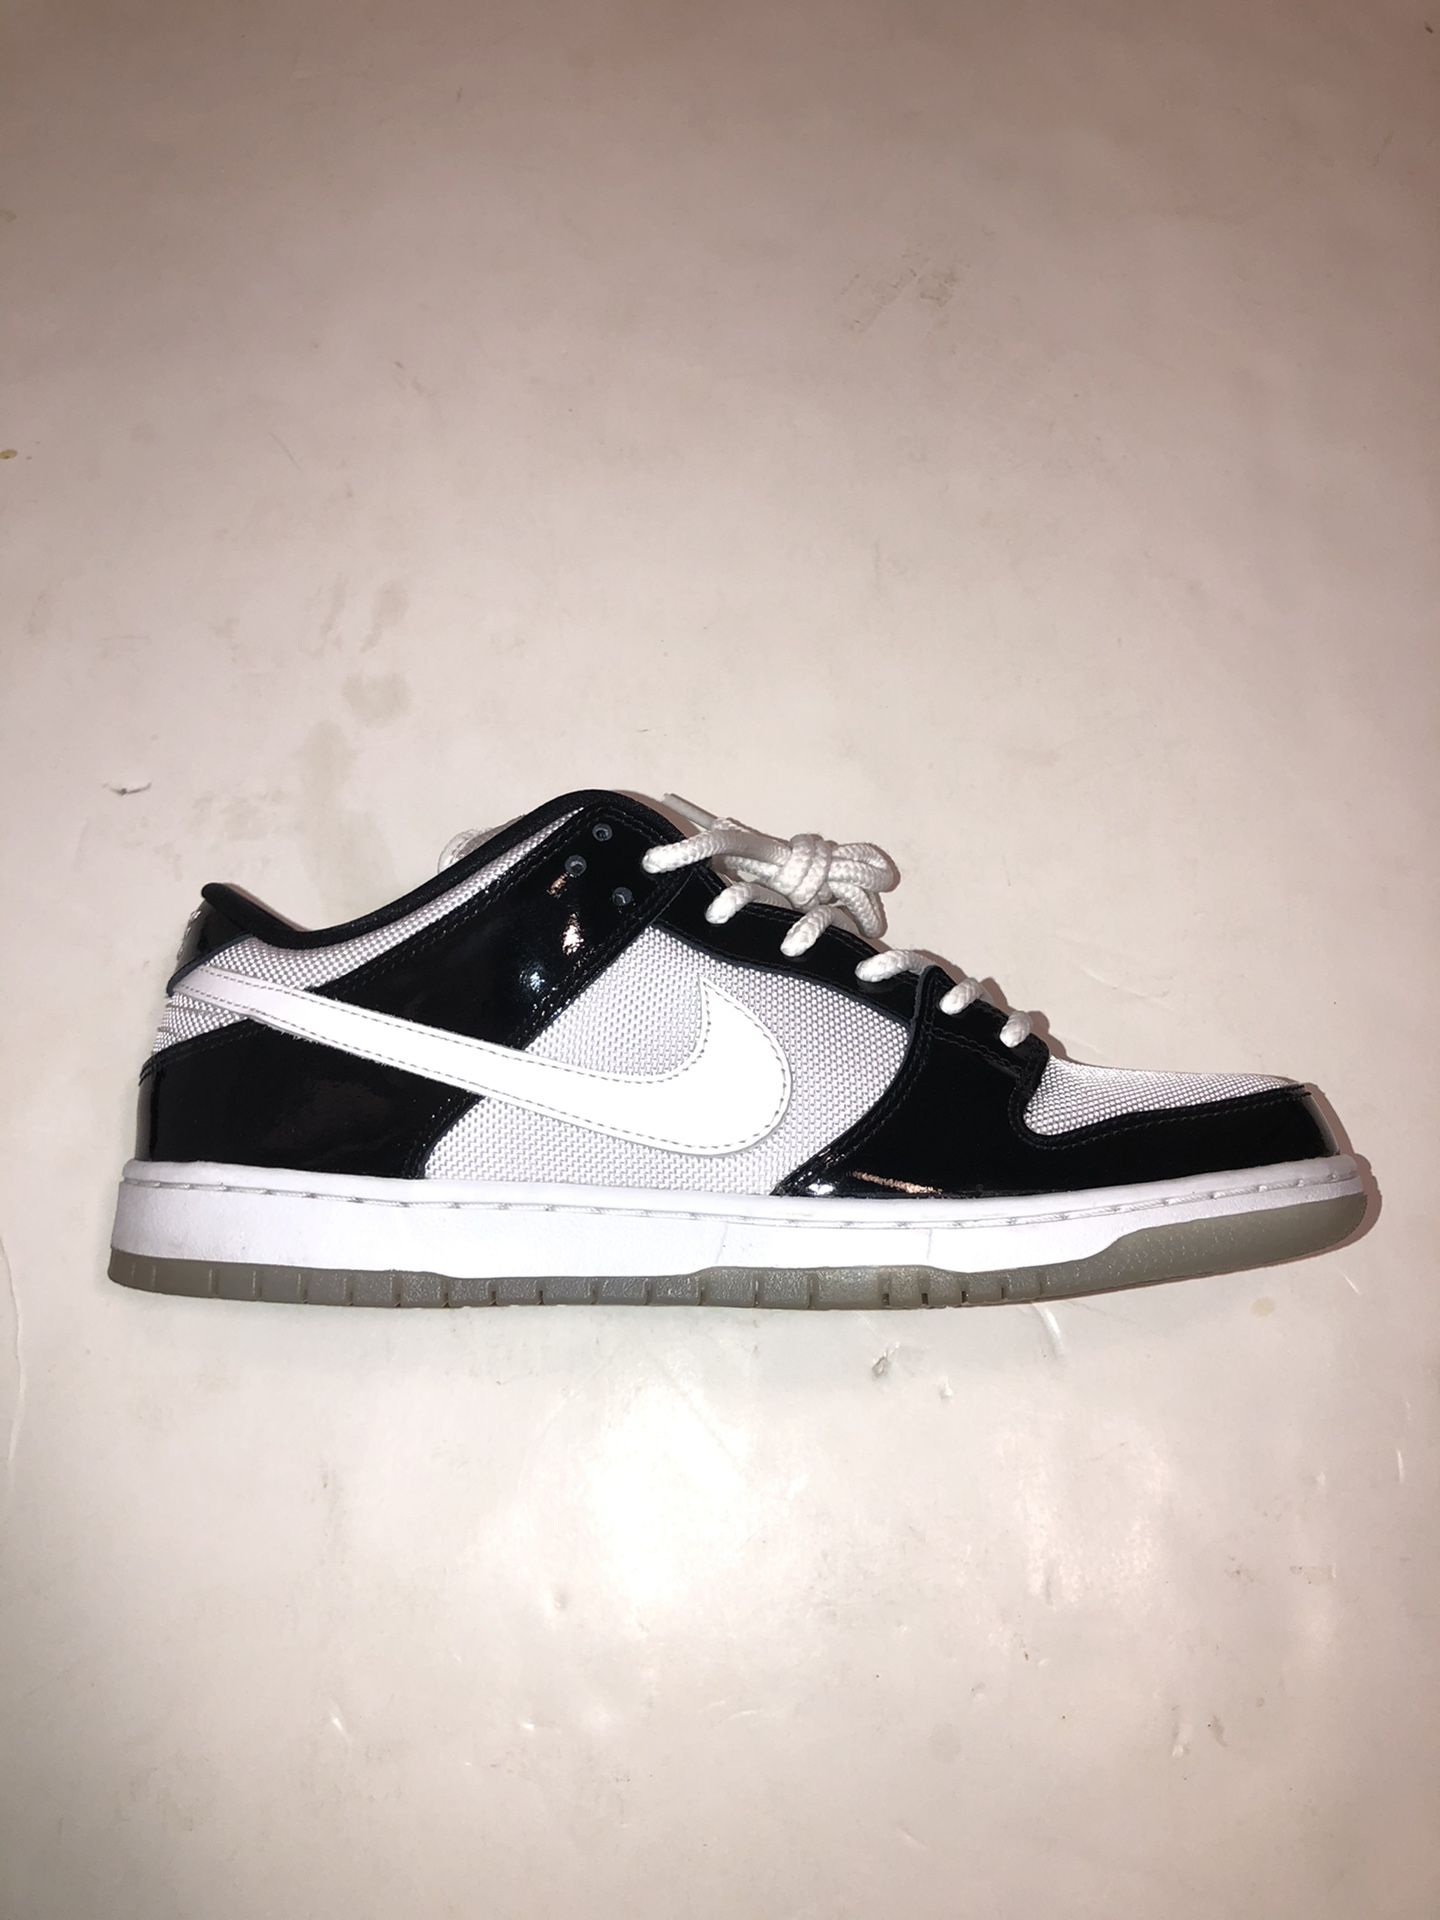 Nike SB Low Dunk ‘Concord’ Size 10.5